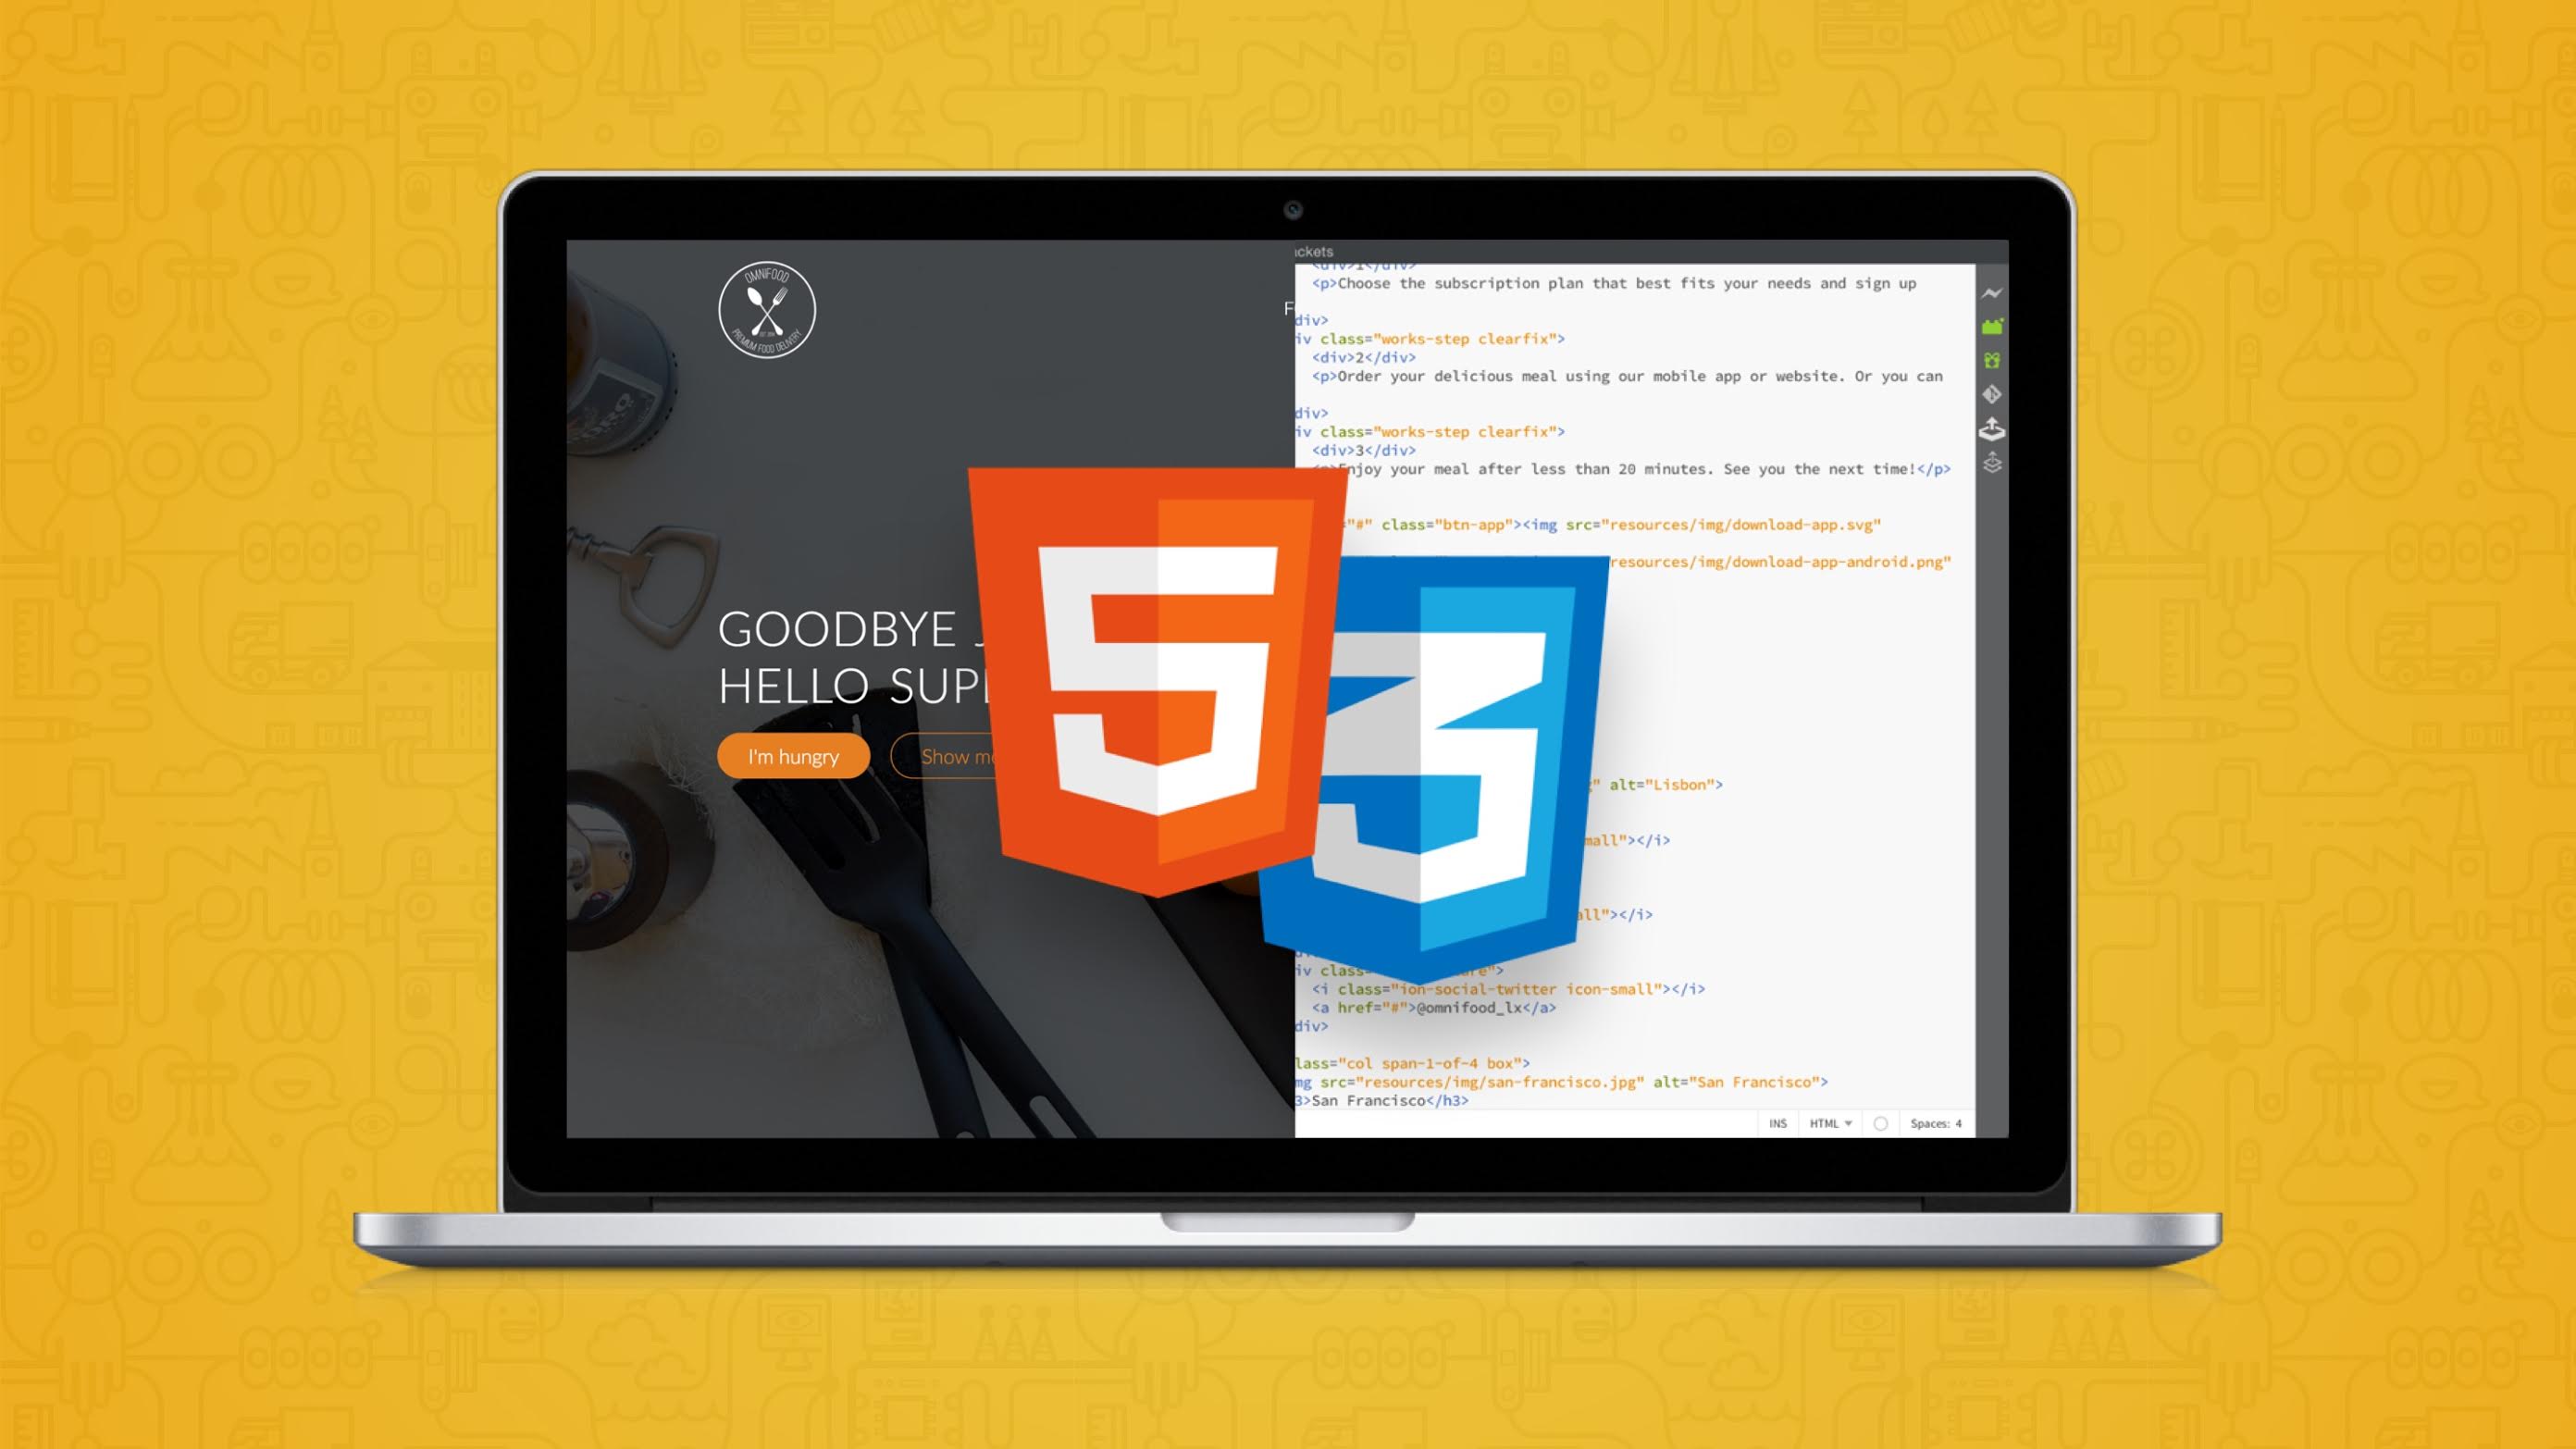 HTML5 and CSS3